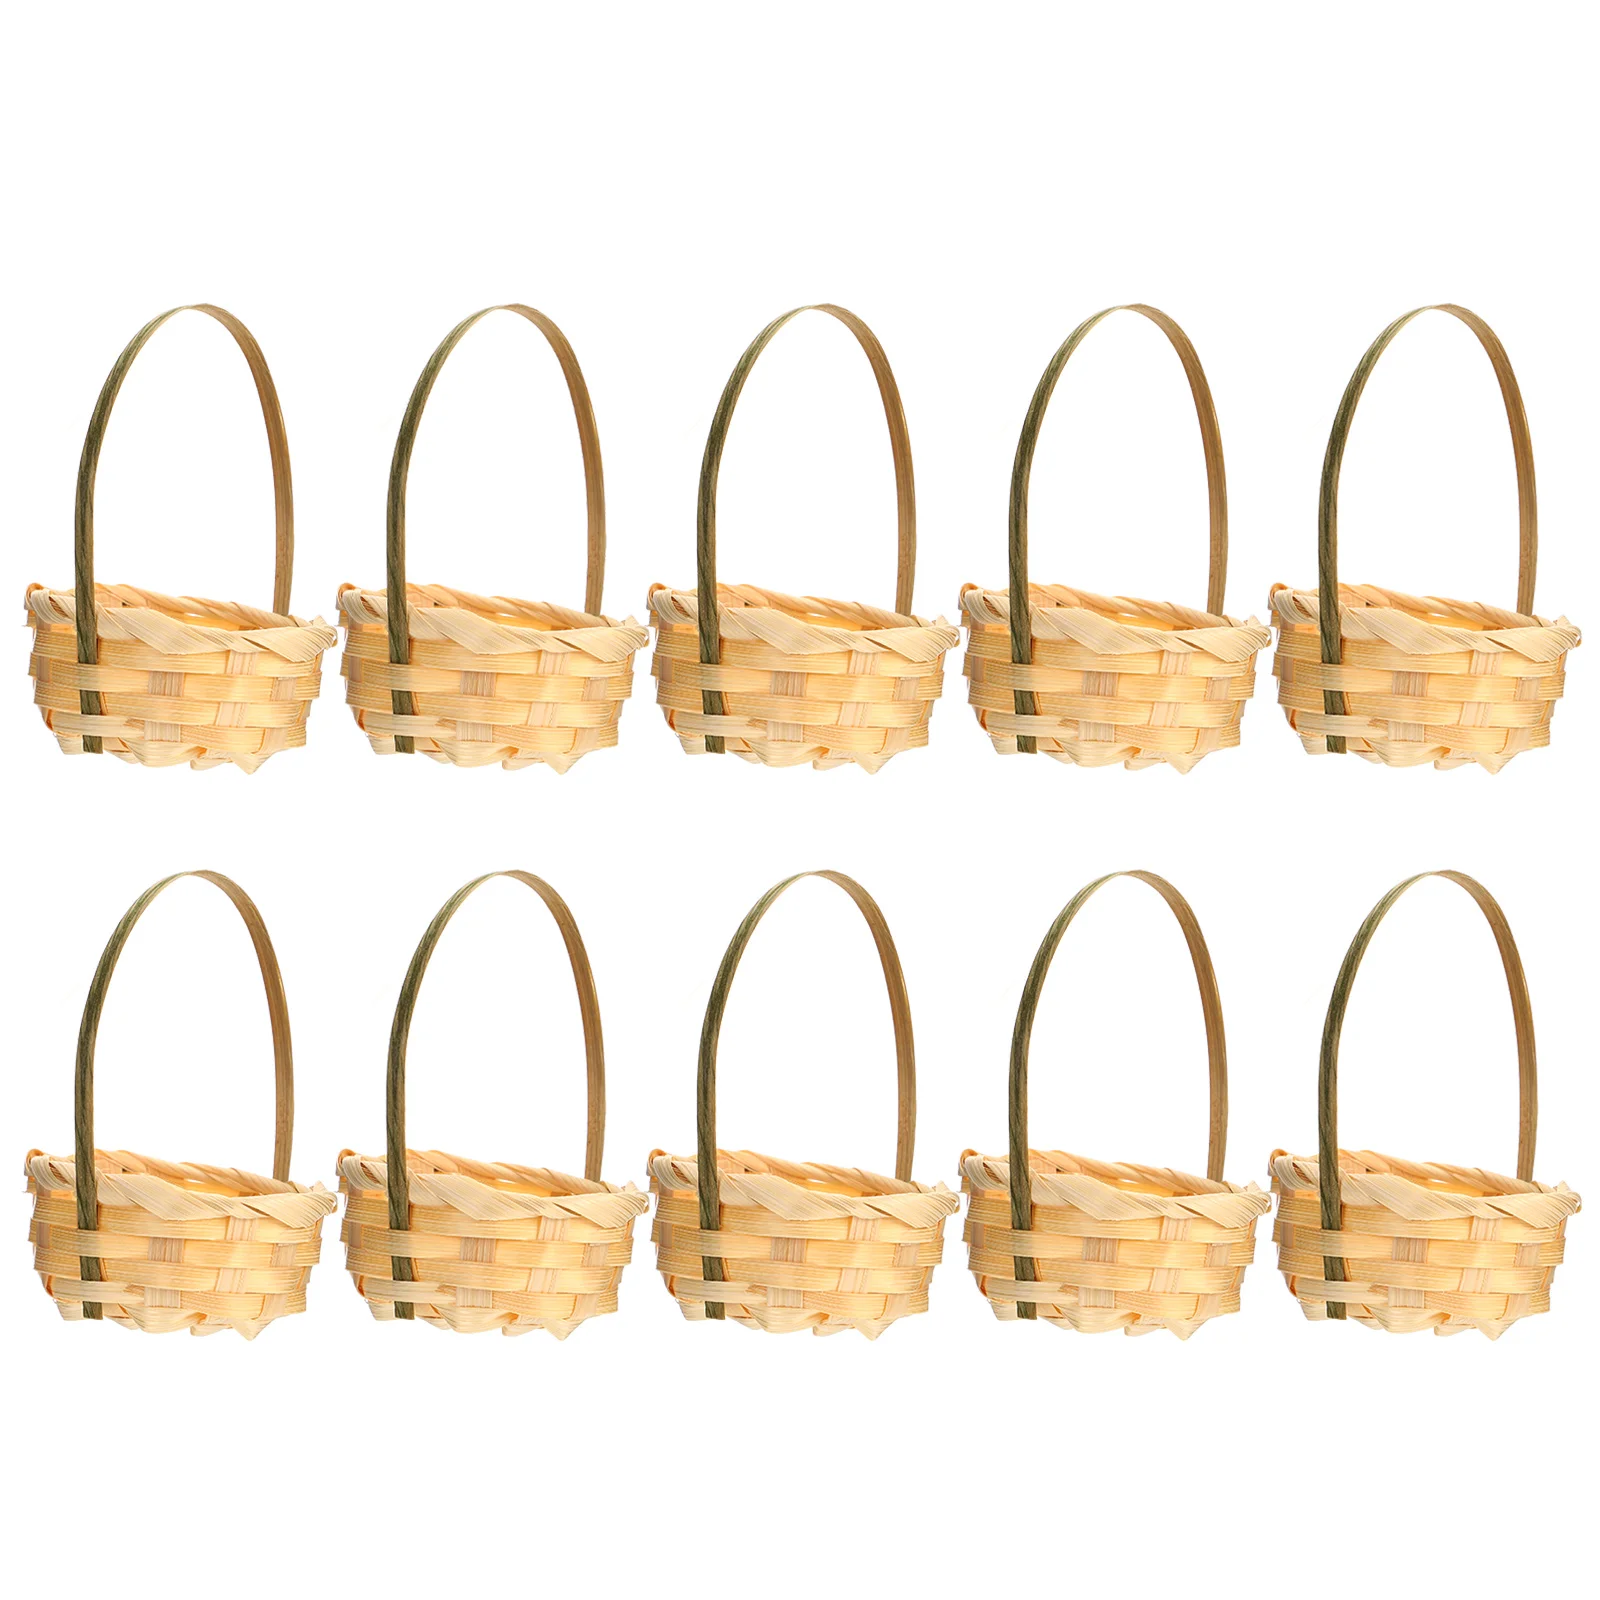 

Basket Baskets Mini Woven Flower Miniature Picnic Rattan Fruit Gift Wicker Storage Candy Tiny Favor Packing Hand Easter Party